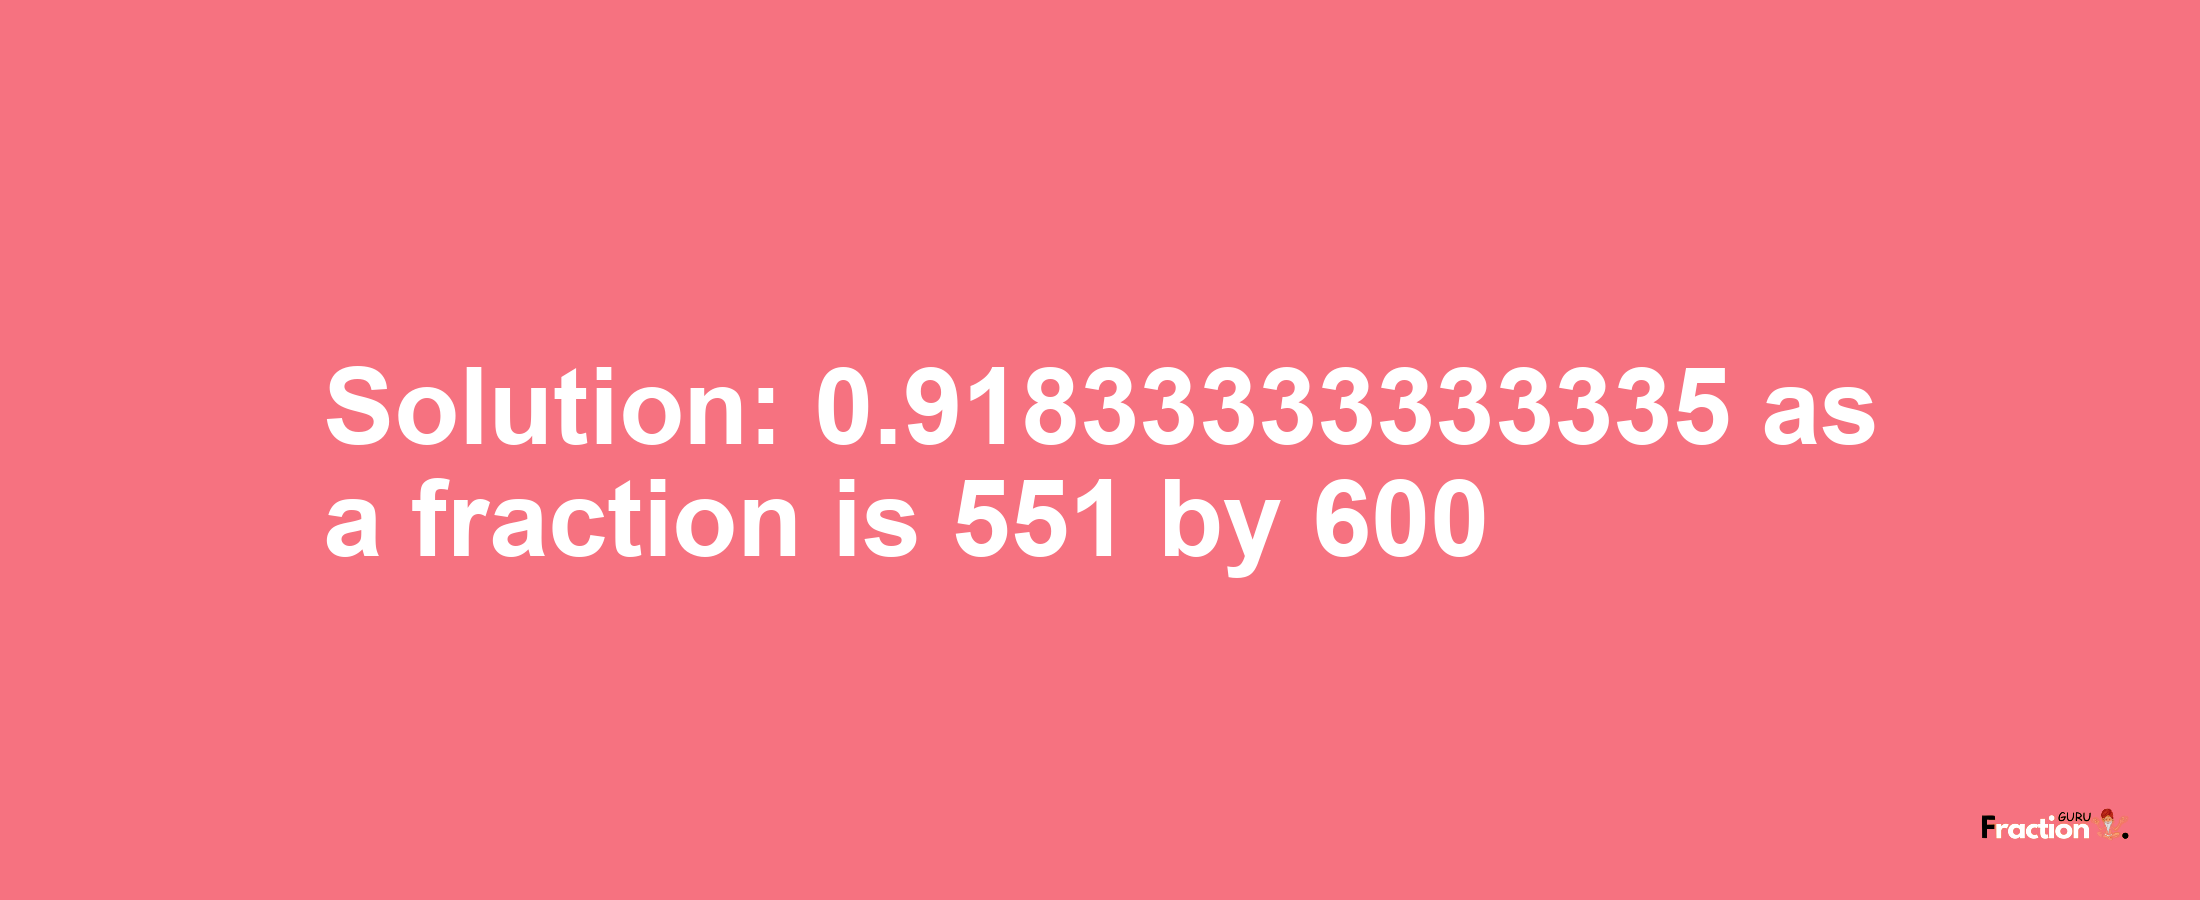 Solution:0.91833333333335 as a fraction is 551/600